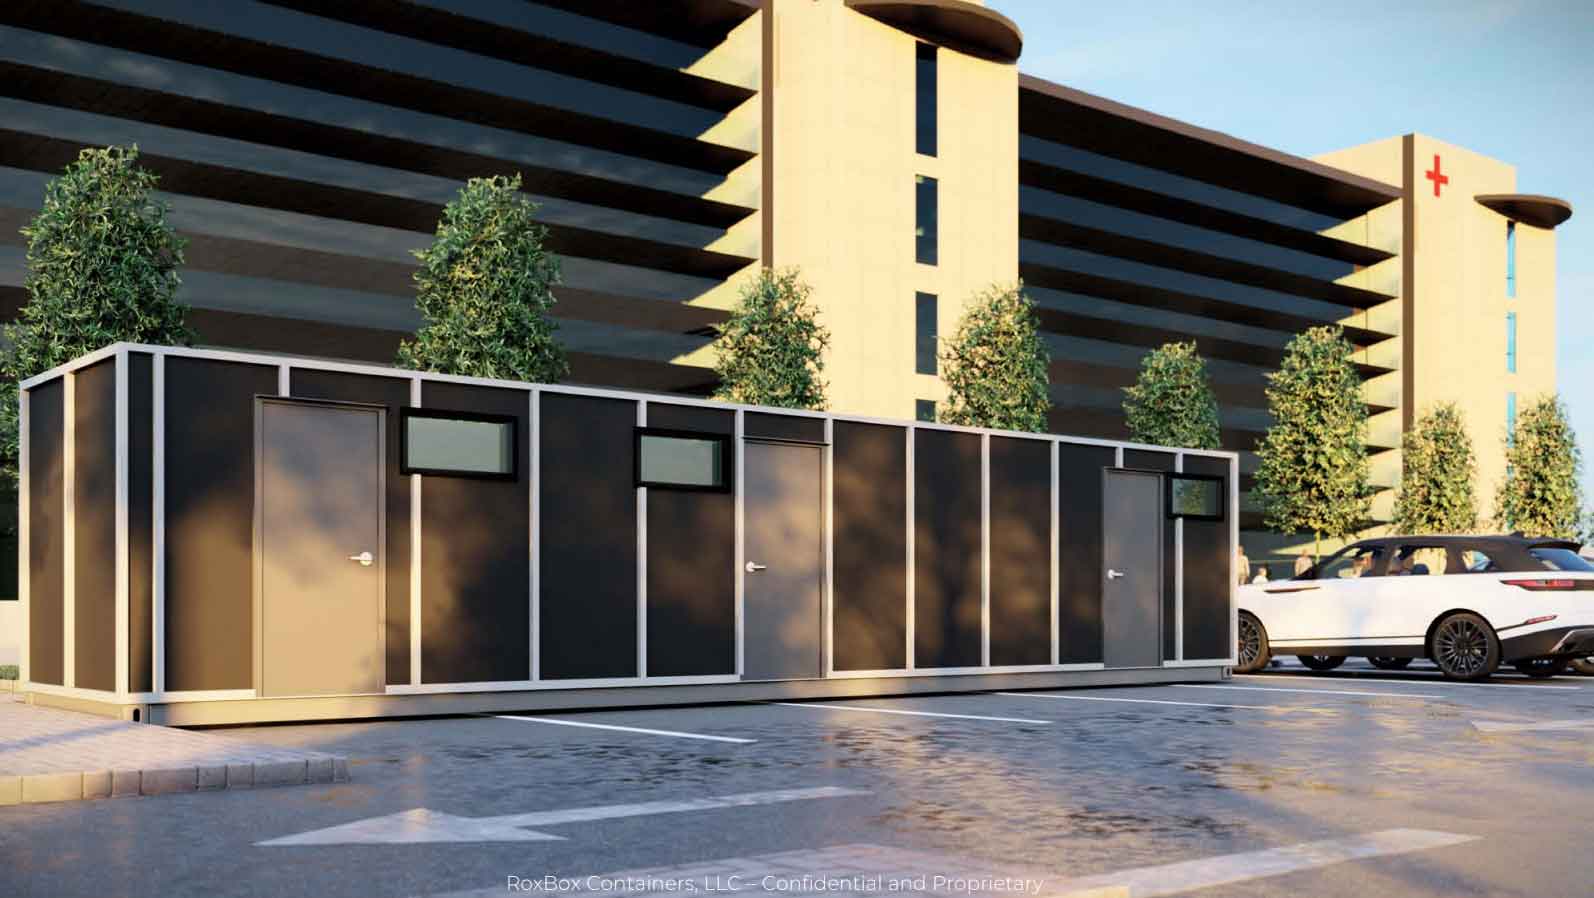 Rendering of one of ROXBOX Containers healthcare shipping container units, used for ICU/exam rooms, vaccine distribution, laboratories, drive-thru covid testing, treatment rooms, and more.